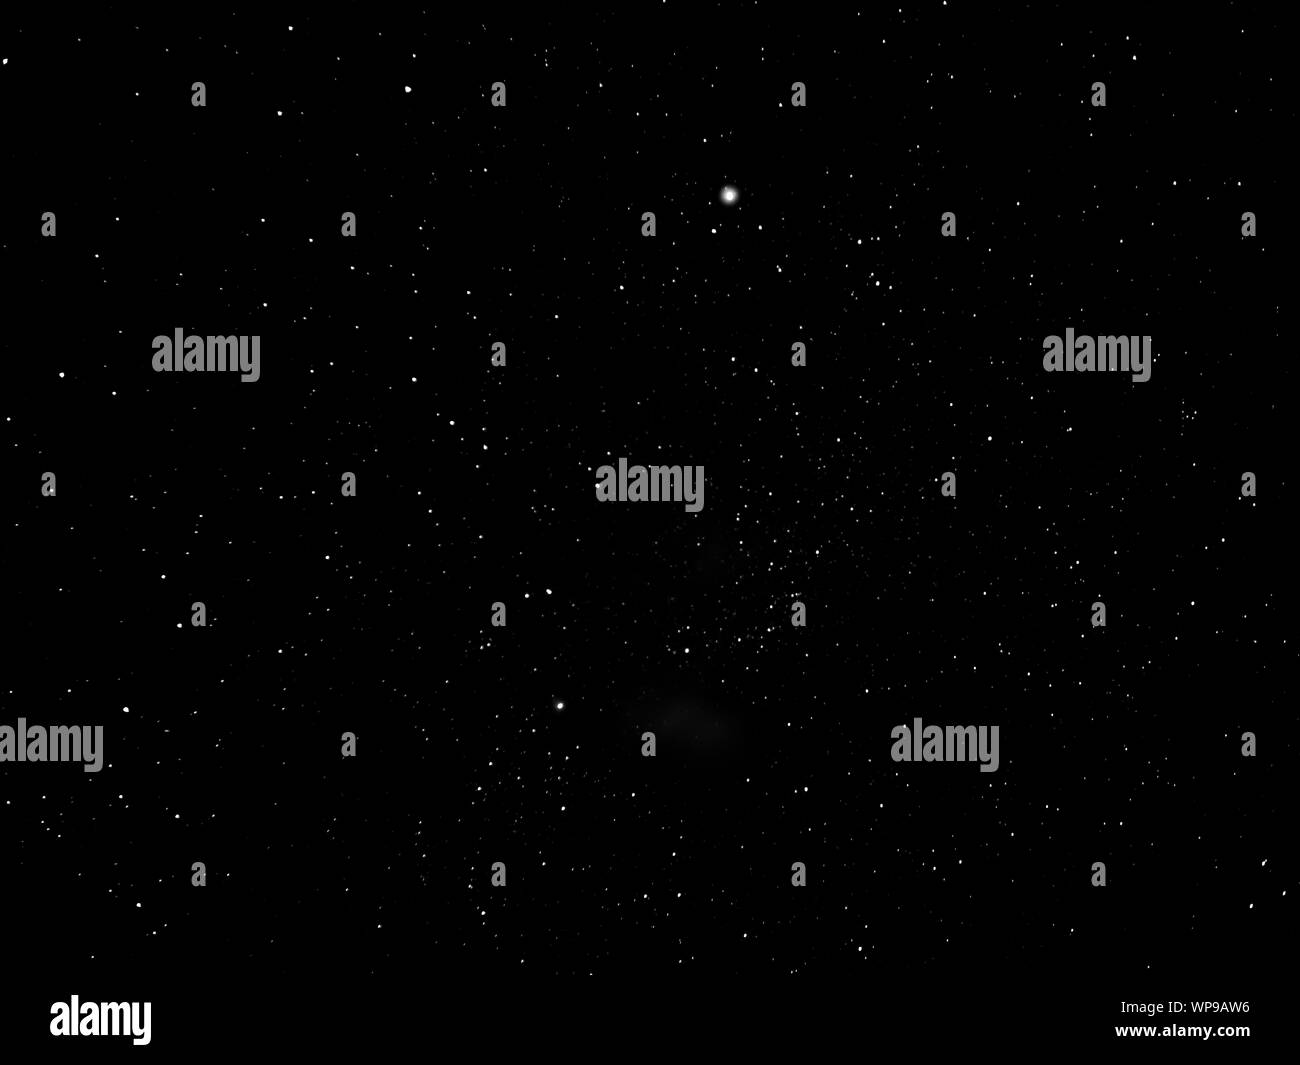 Wallpaper Stars in The Sky During Night Time Background  Download Free  Image